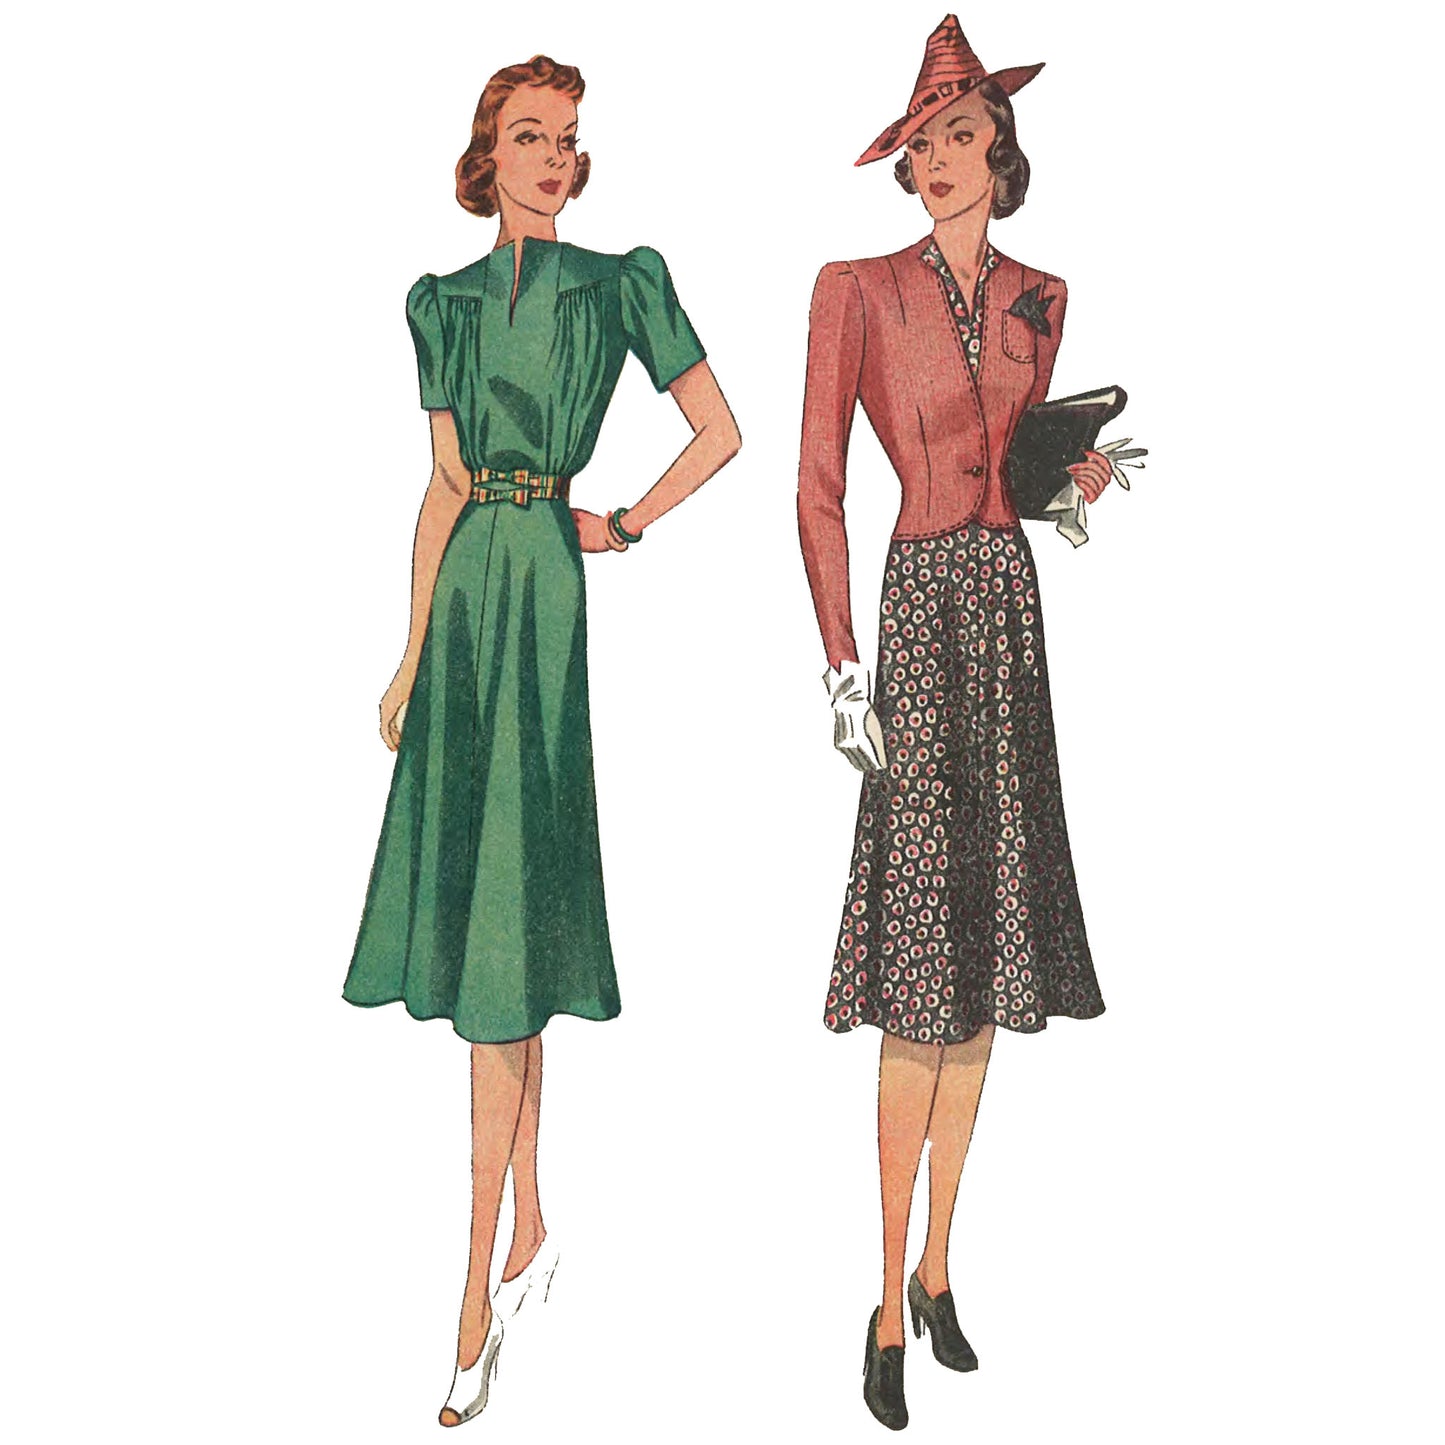 Two women wearing a 1940s dress and jacket